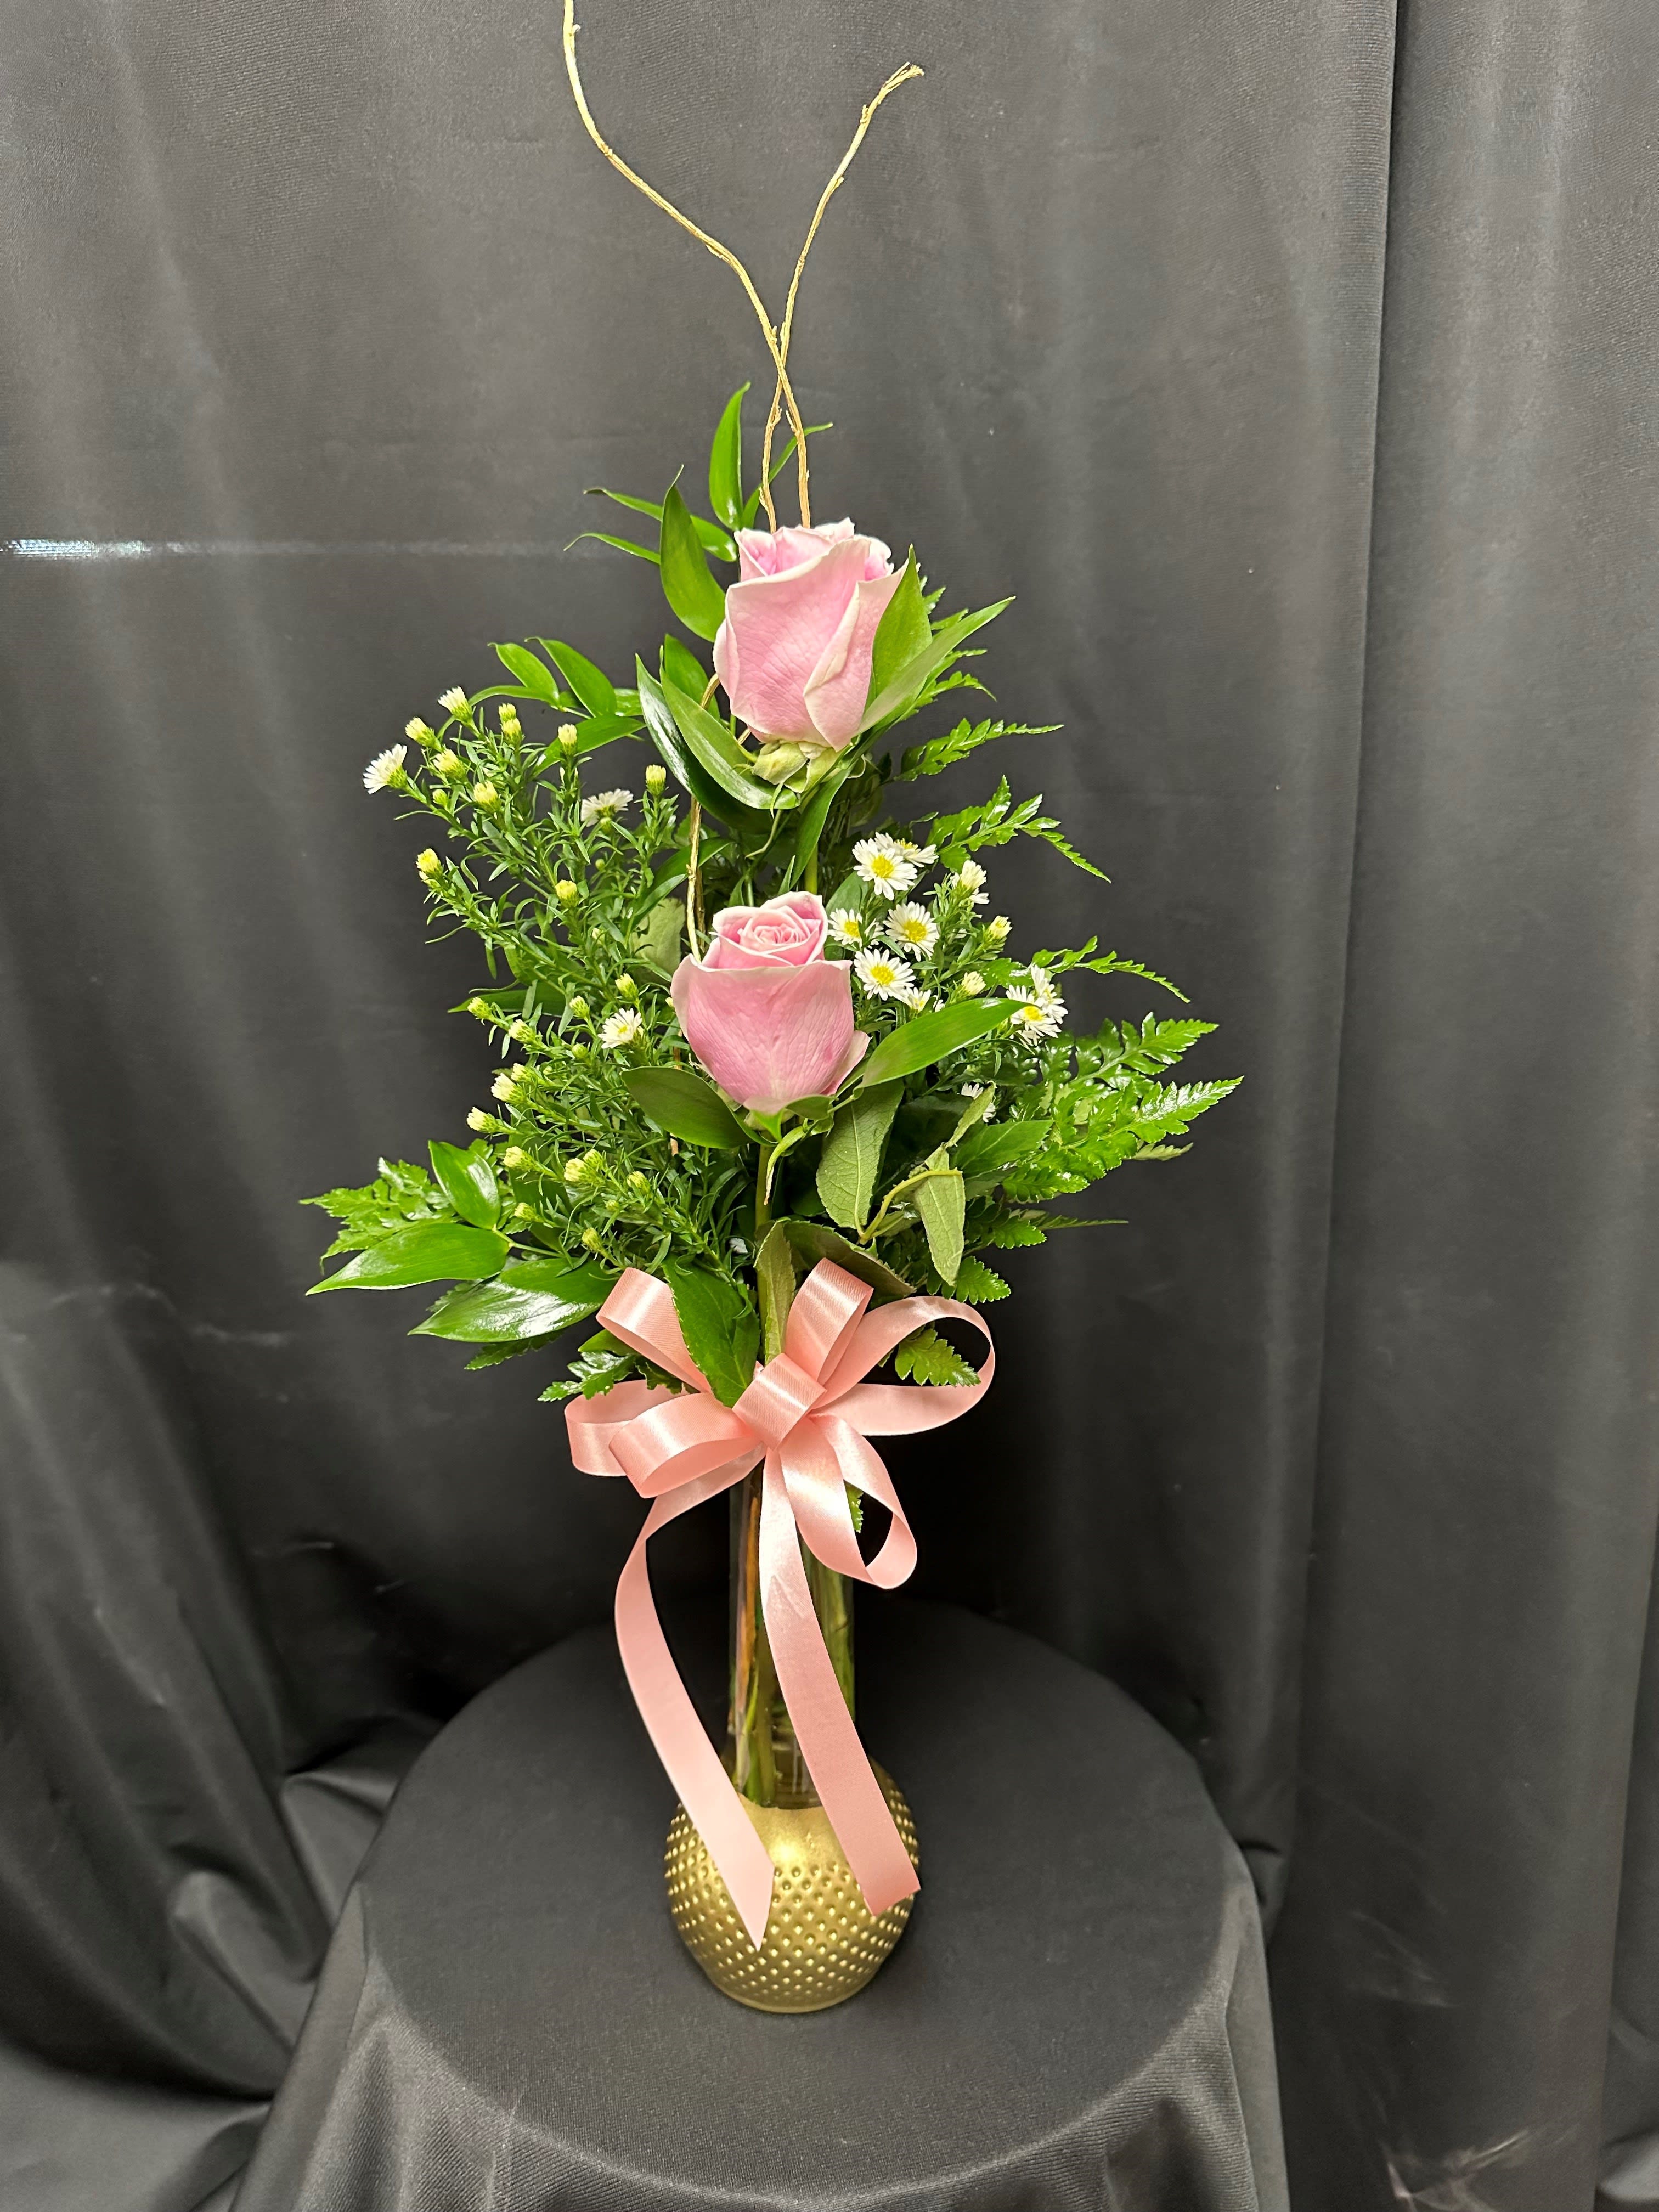 Dreaming of Genie - Bring some whimsy into her life with beautiful pink roses surrounded by greens, white monte casino, and a pink bow in a gold bottom vase.